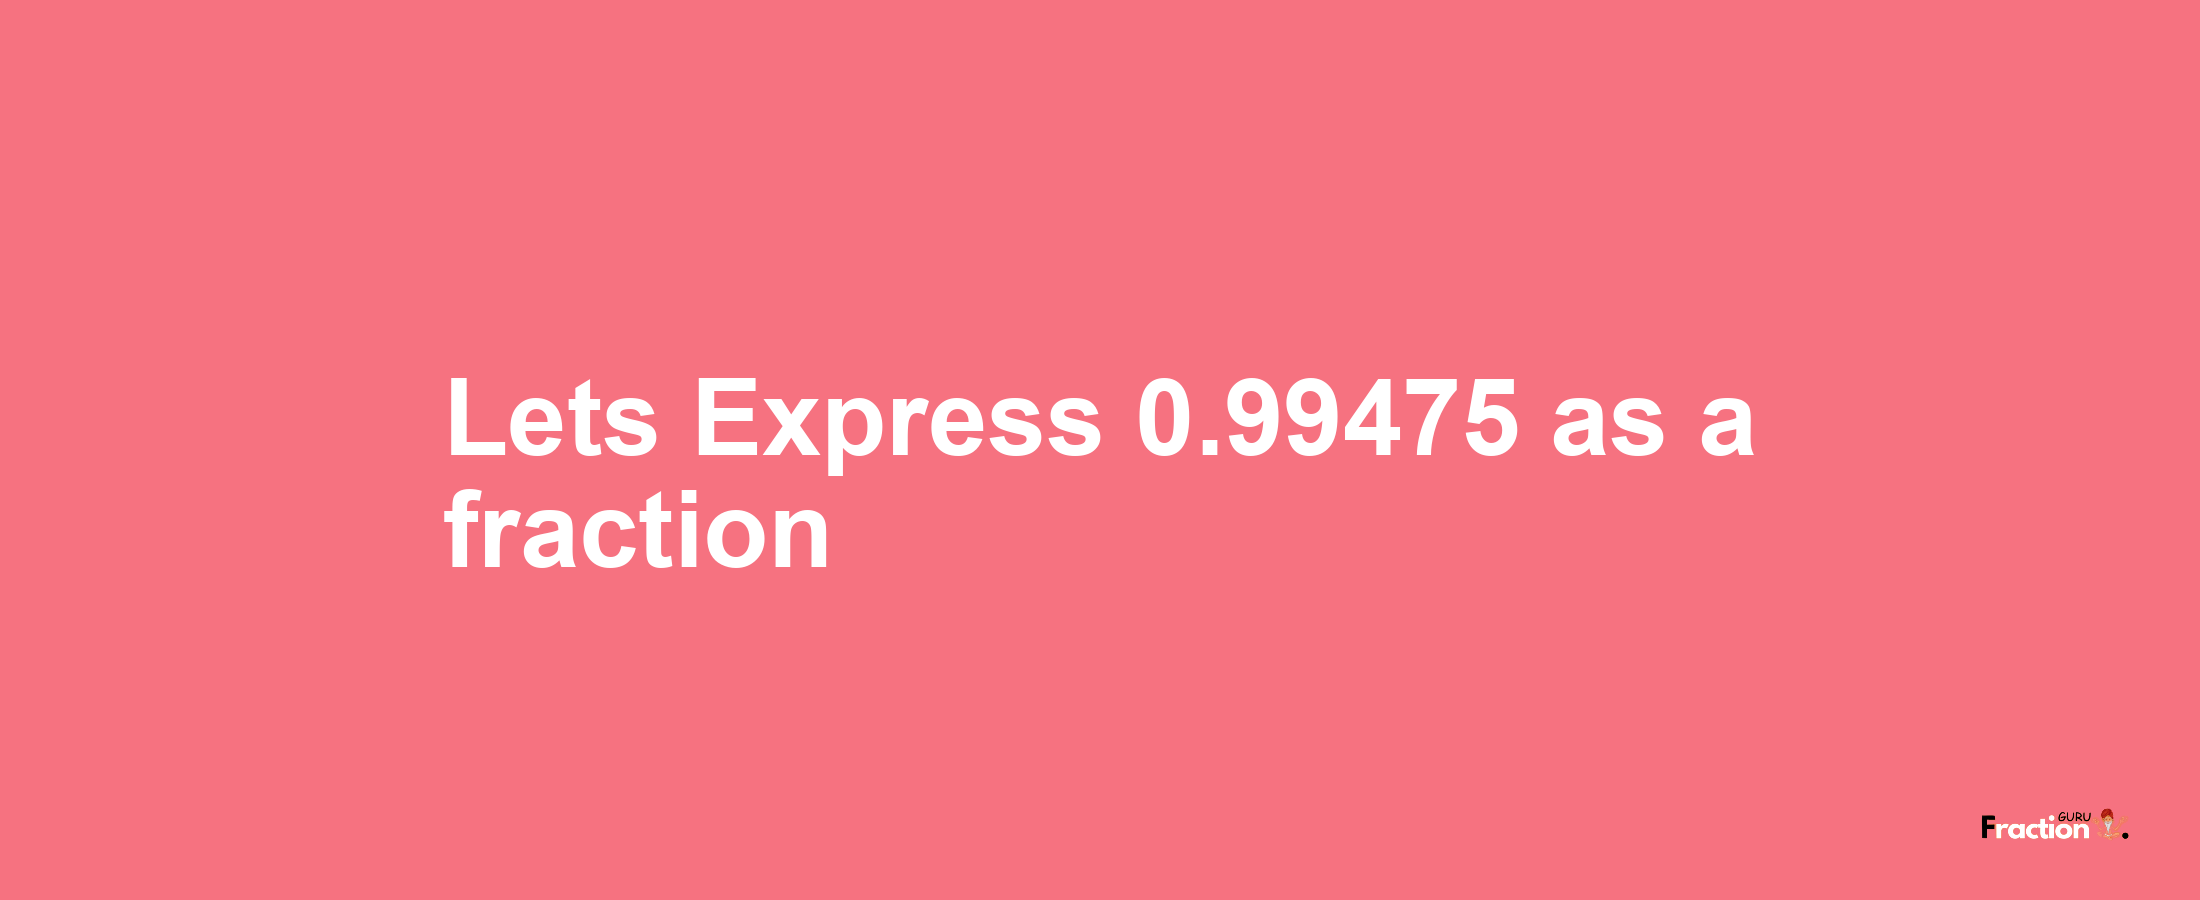 Lets Express 0.99475 as afraction